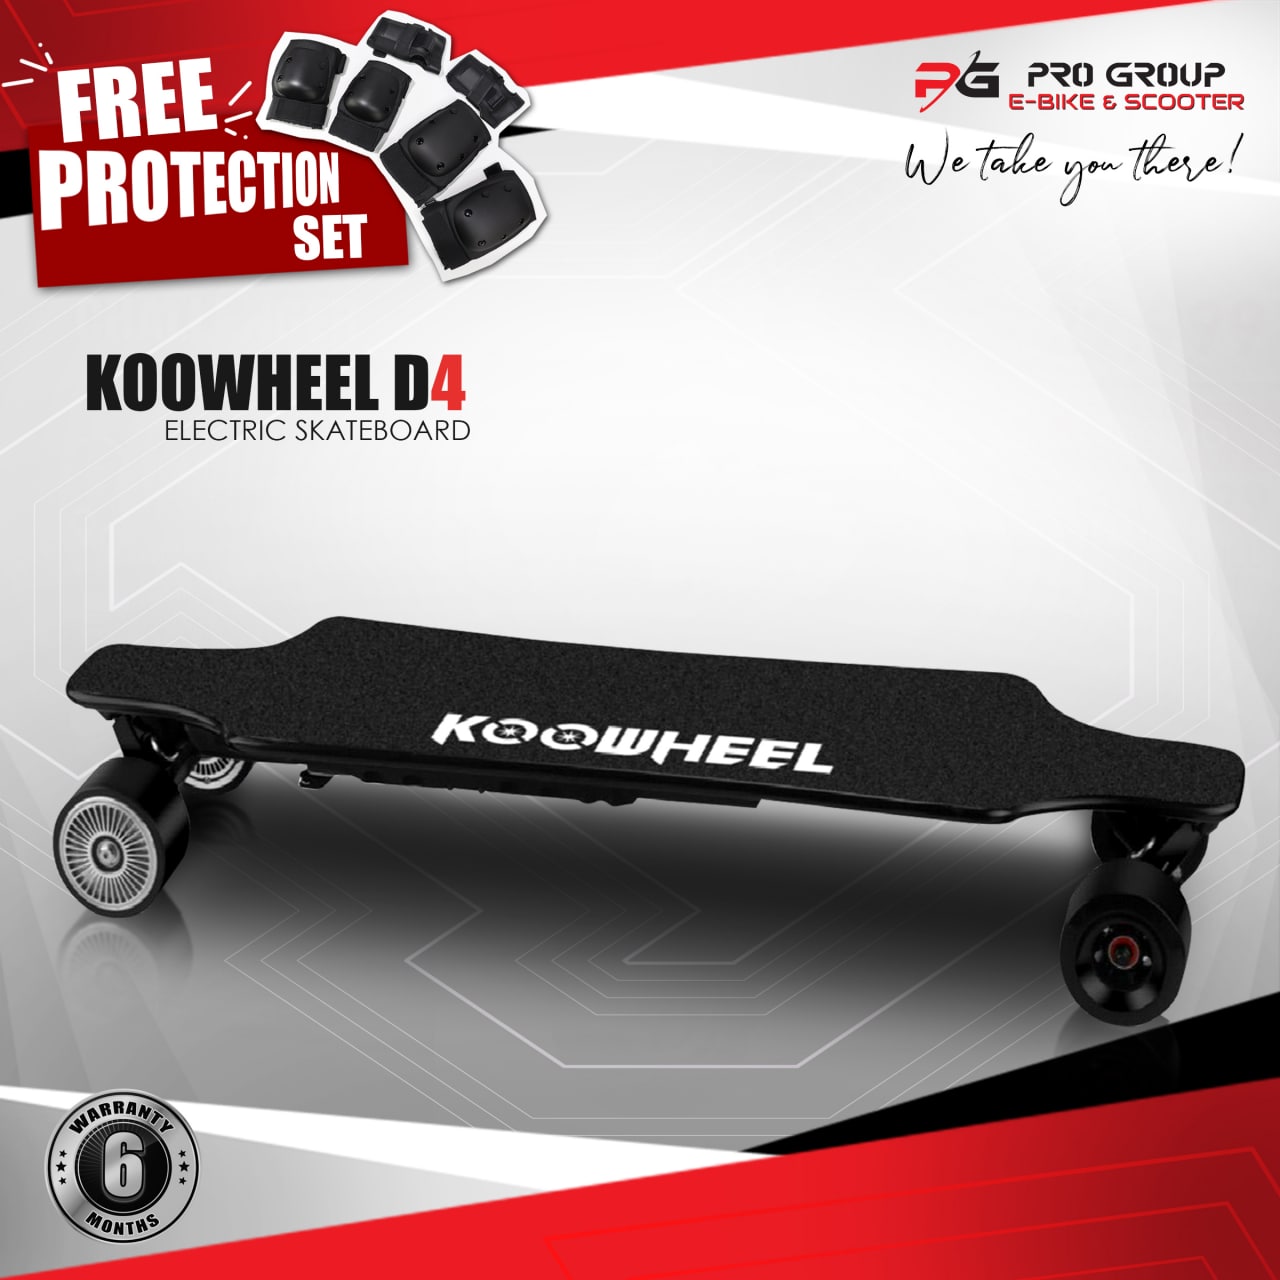 Koowheel D4 2 Electric Skateboard Pro Group Electric Bike and Philippines